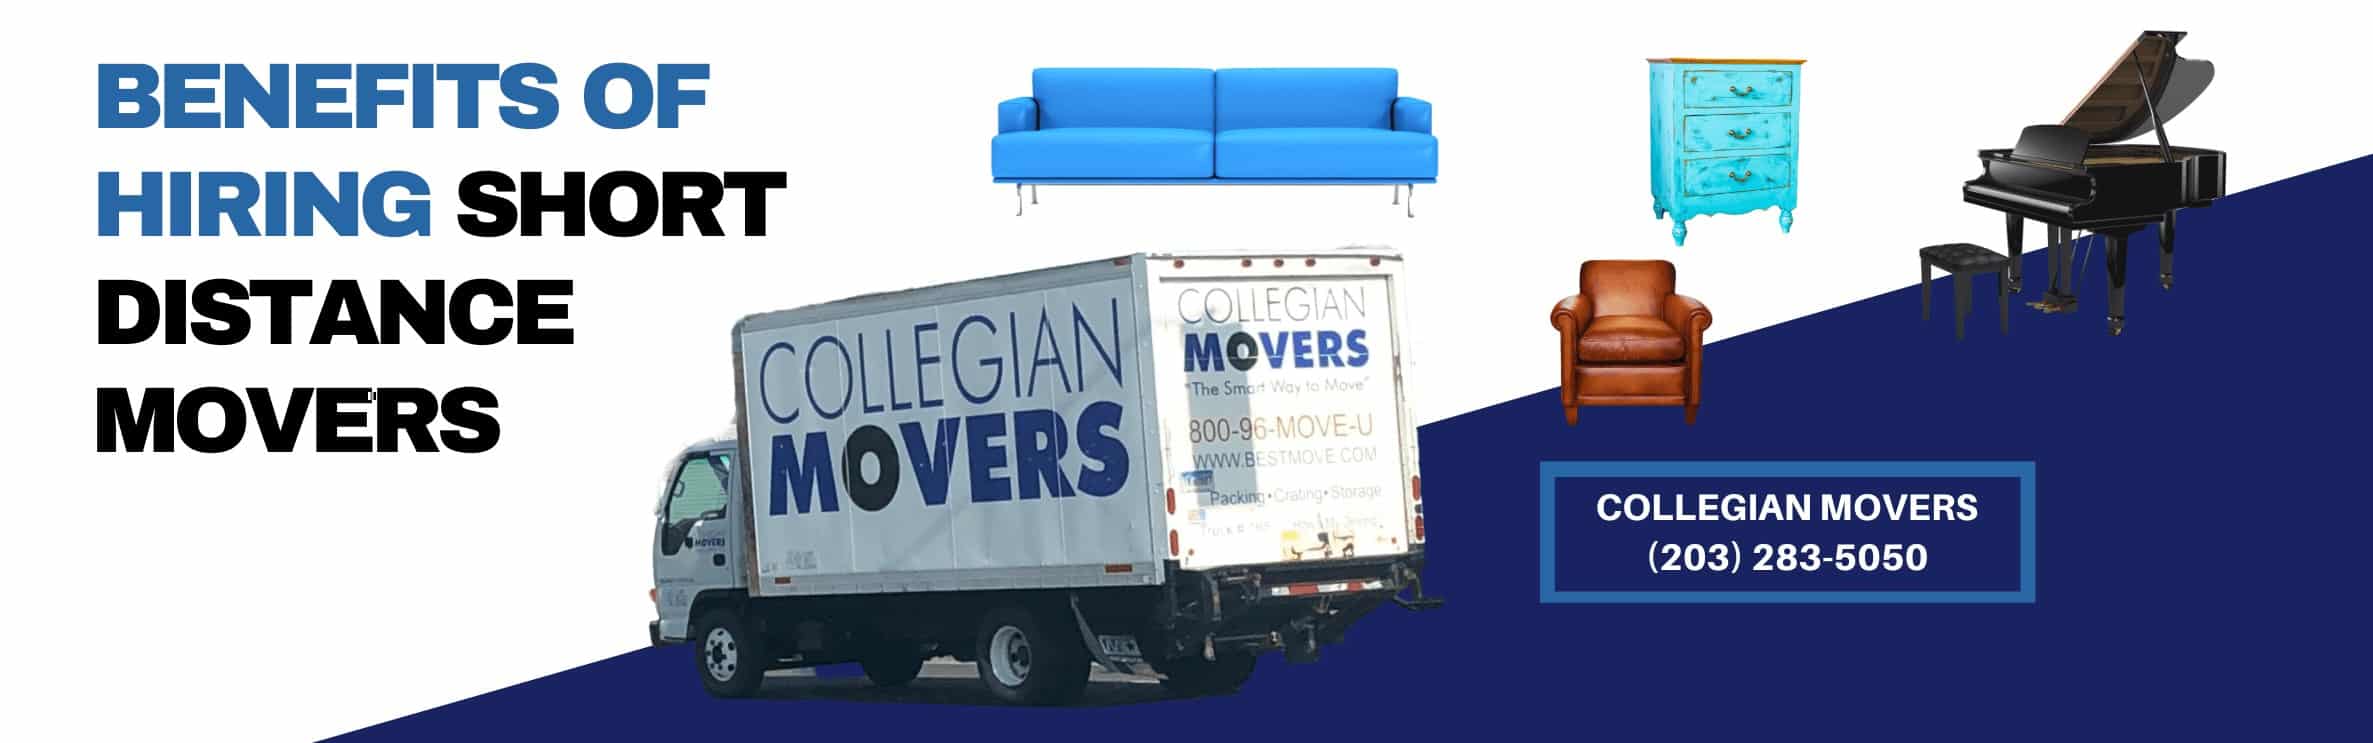 Benefits of Hiring Short Distance Movers